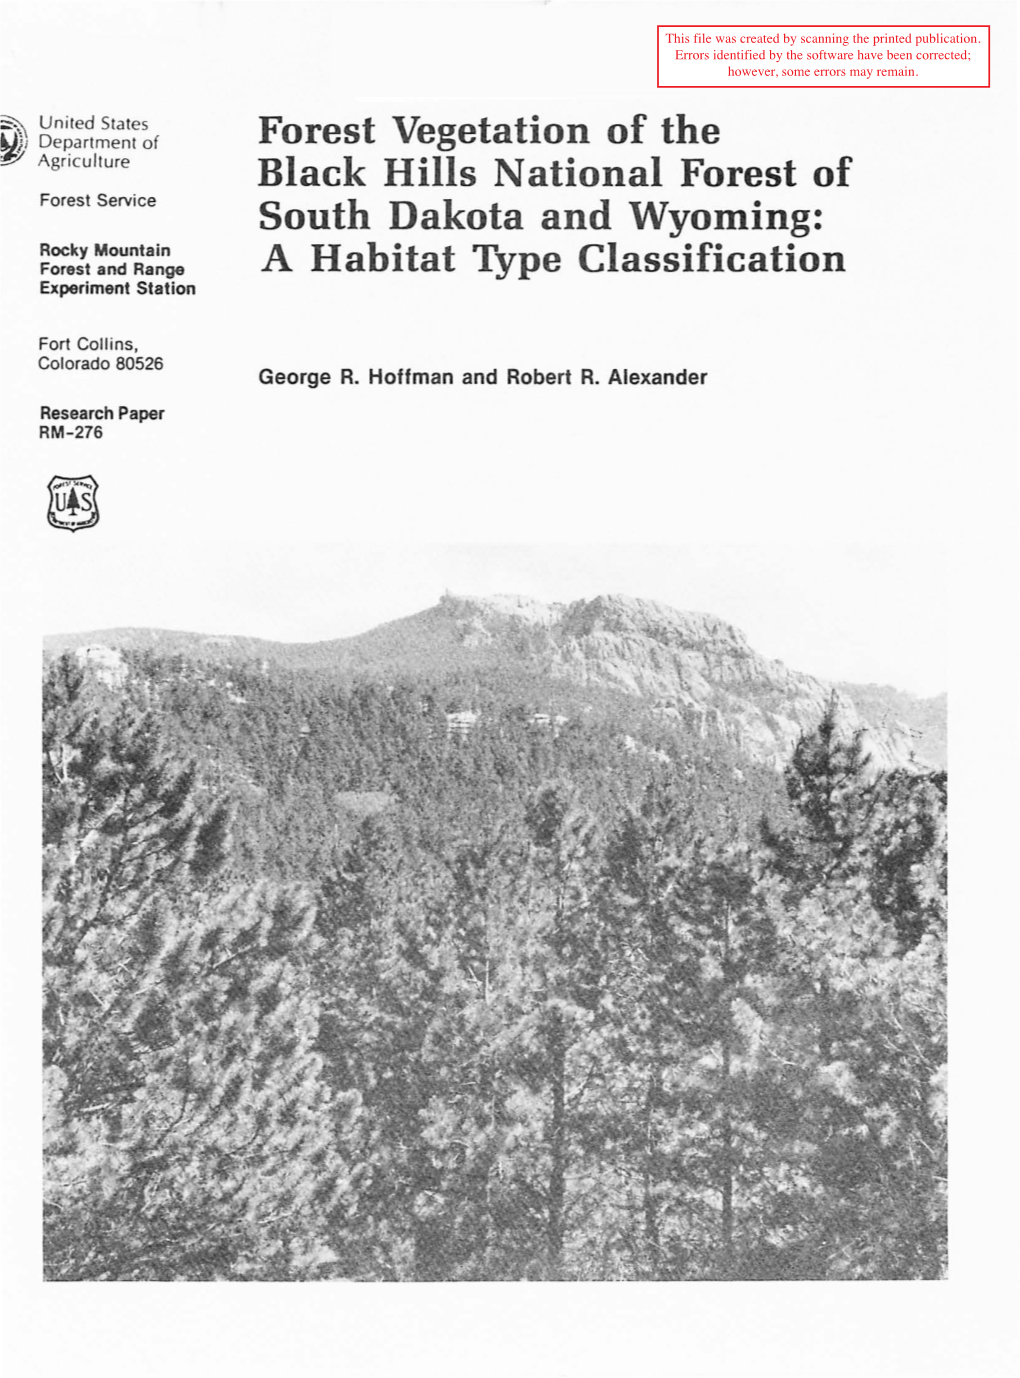 Forest Vegetation of the Black Hills National Forest of South Dakota and Wyoming: a Habitat Type Classification